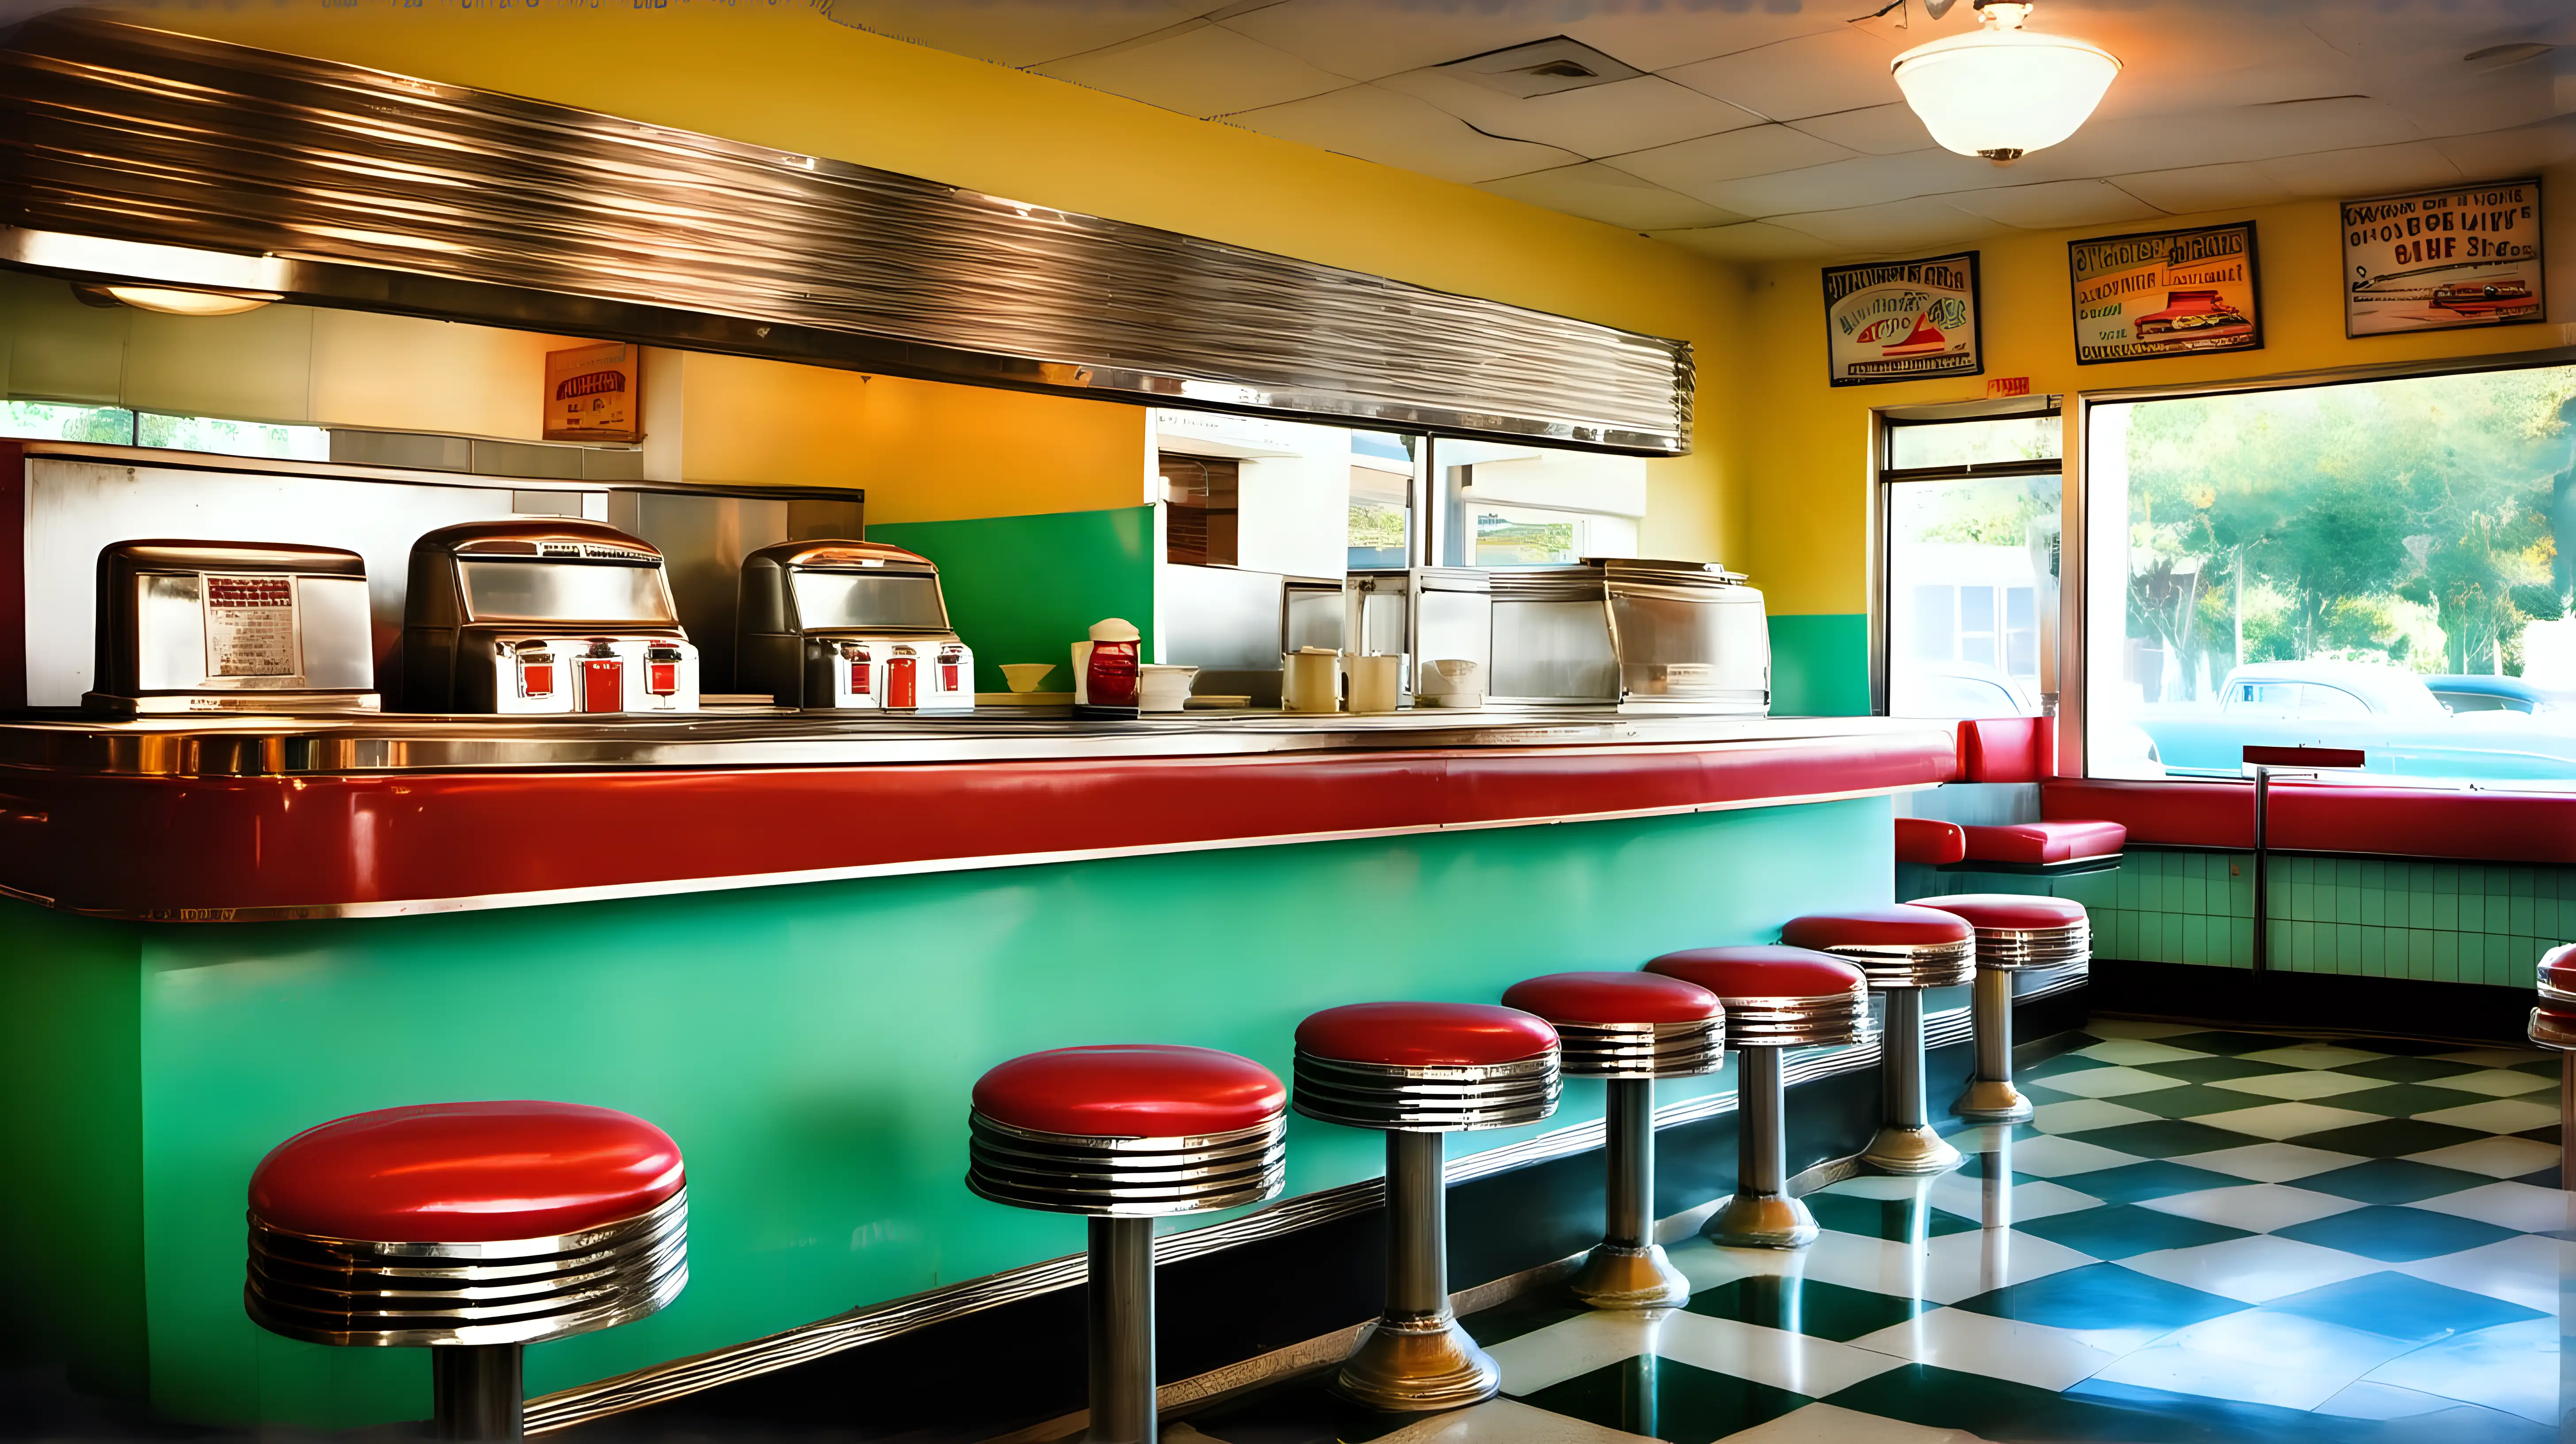 1950s Diner Counter with Vibrant Colors Nostalgic Snapshot